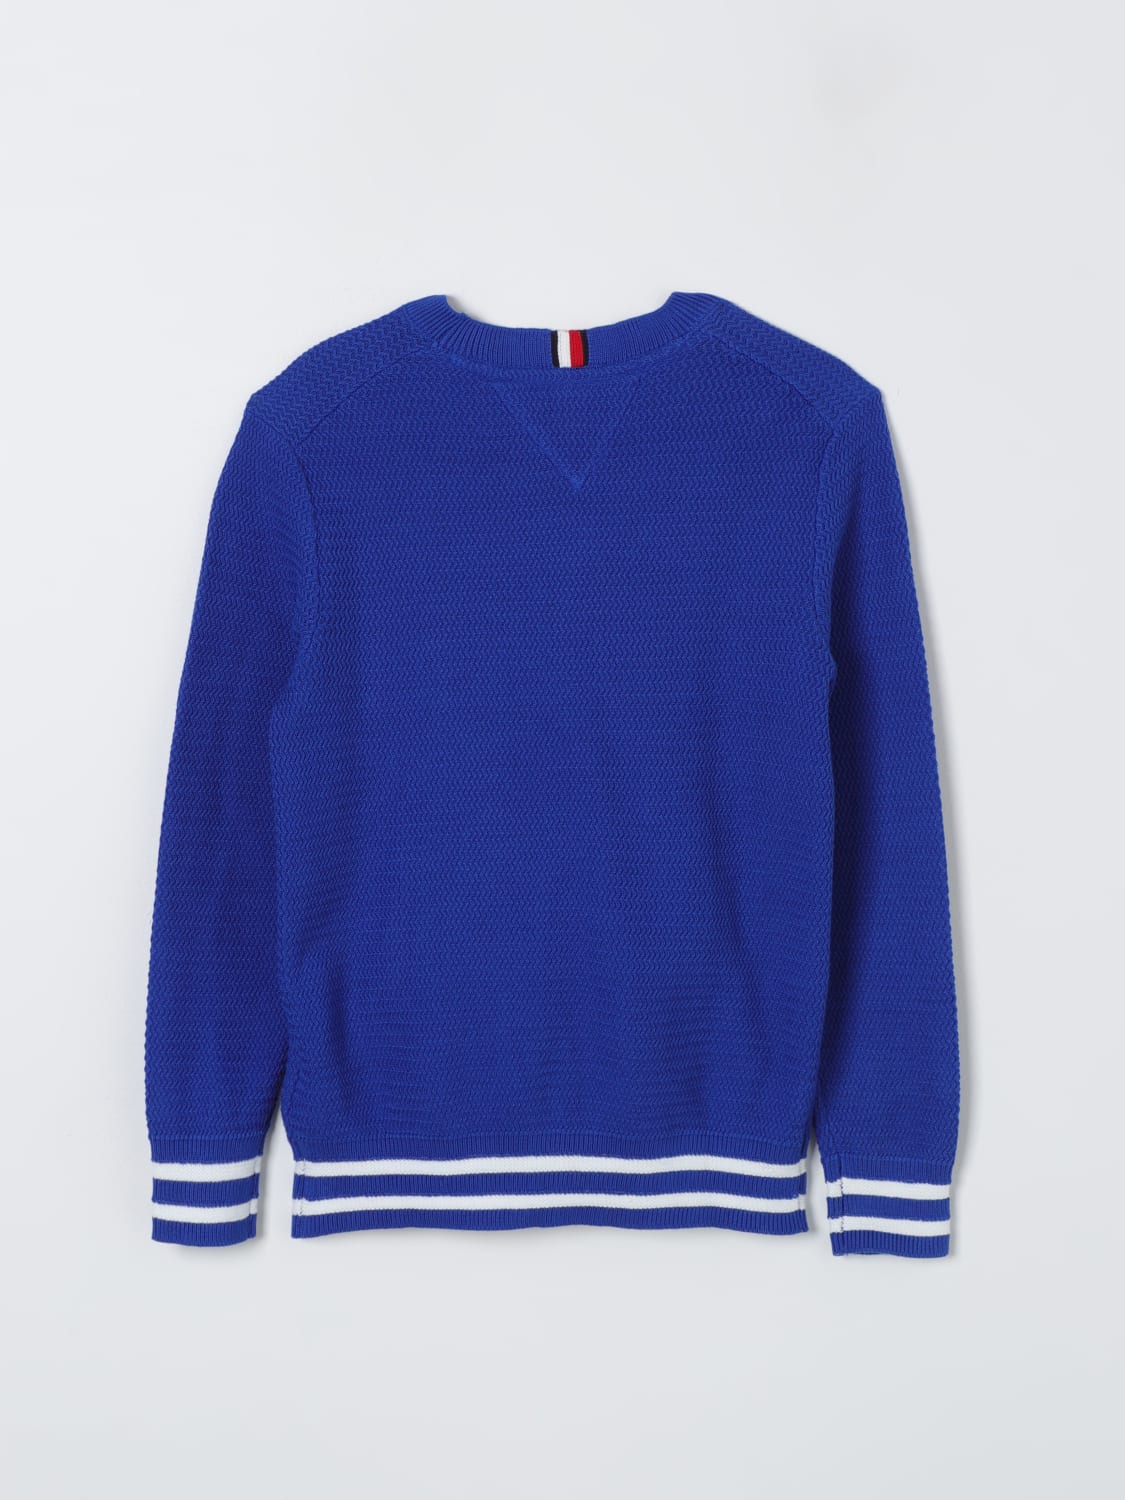 Tommy Hilfiger, Boys Essential Colour Block Sweater, Navy C87